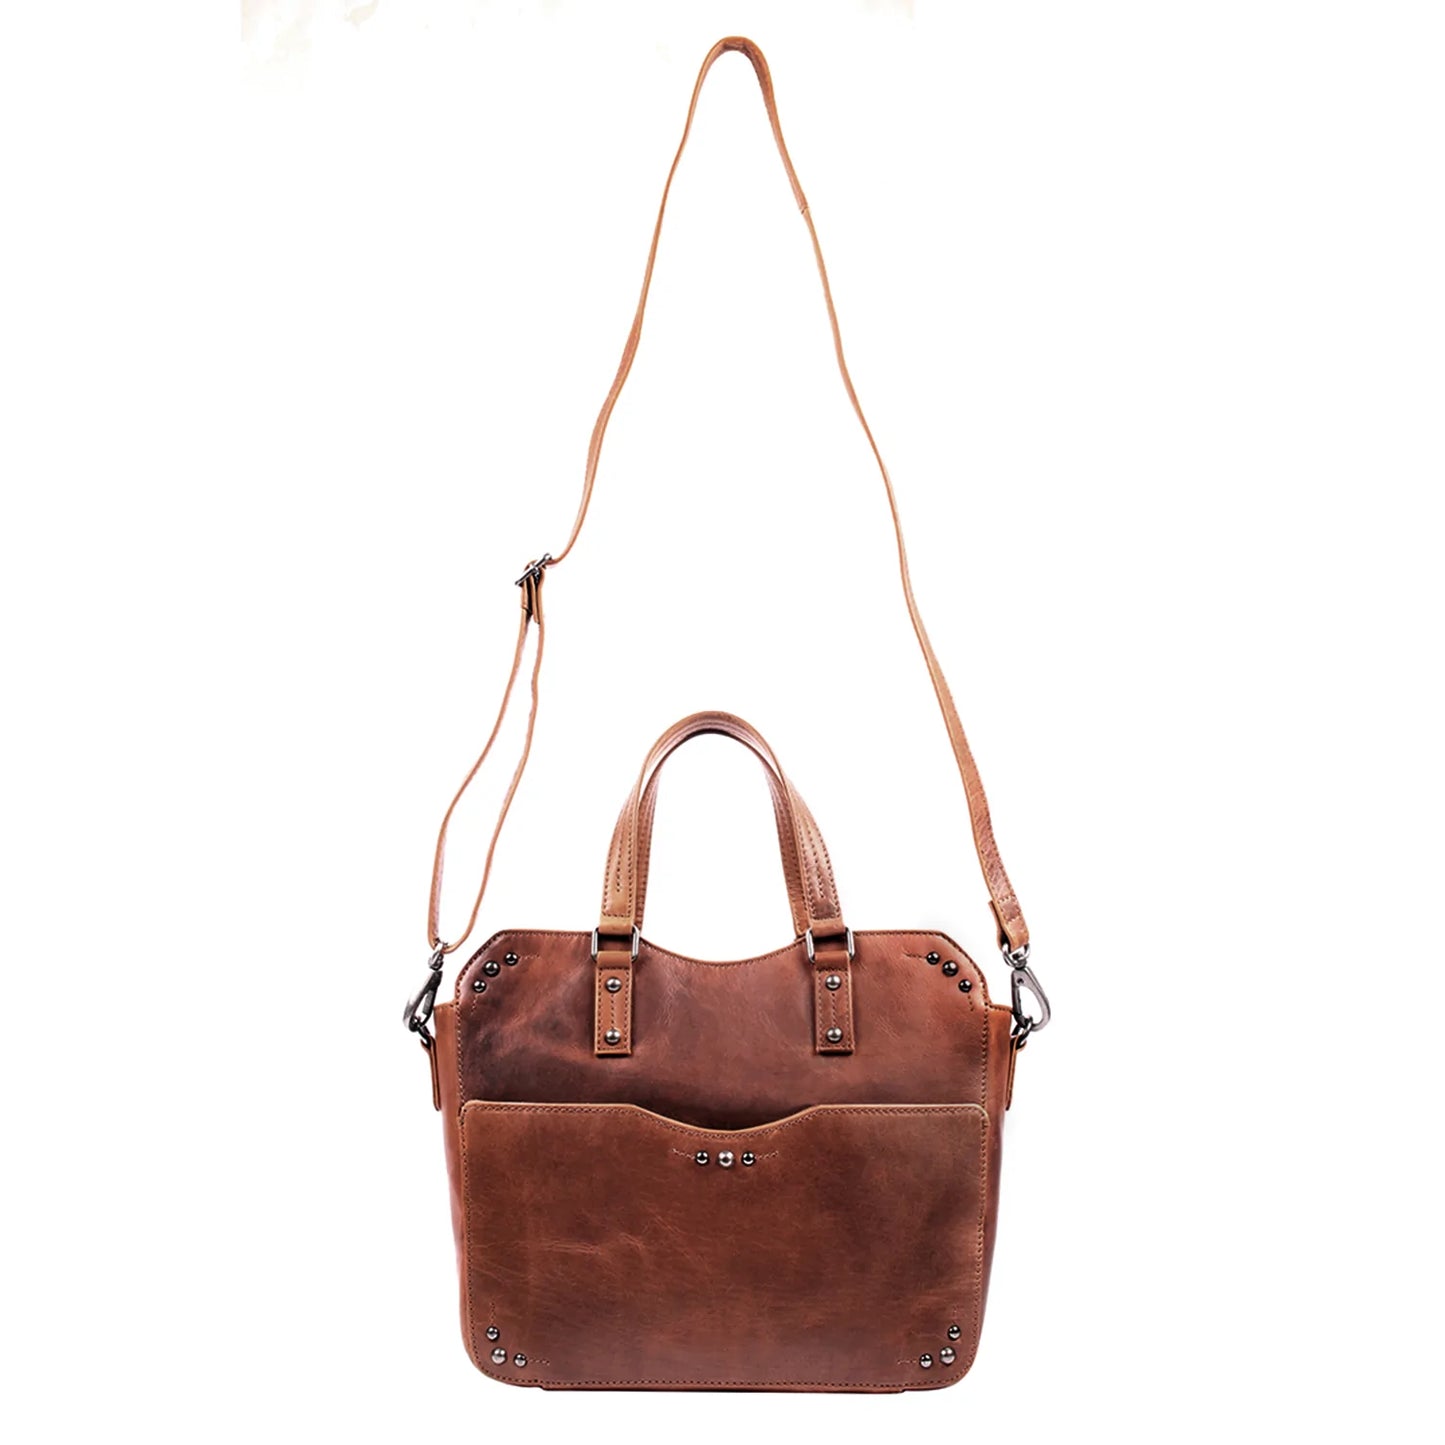 Bethany Leather Concealed Carry Lockable Satchel - Hiding Hilda, LLC